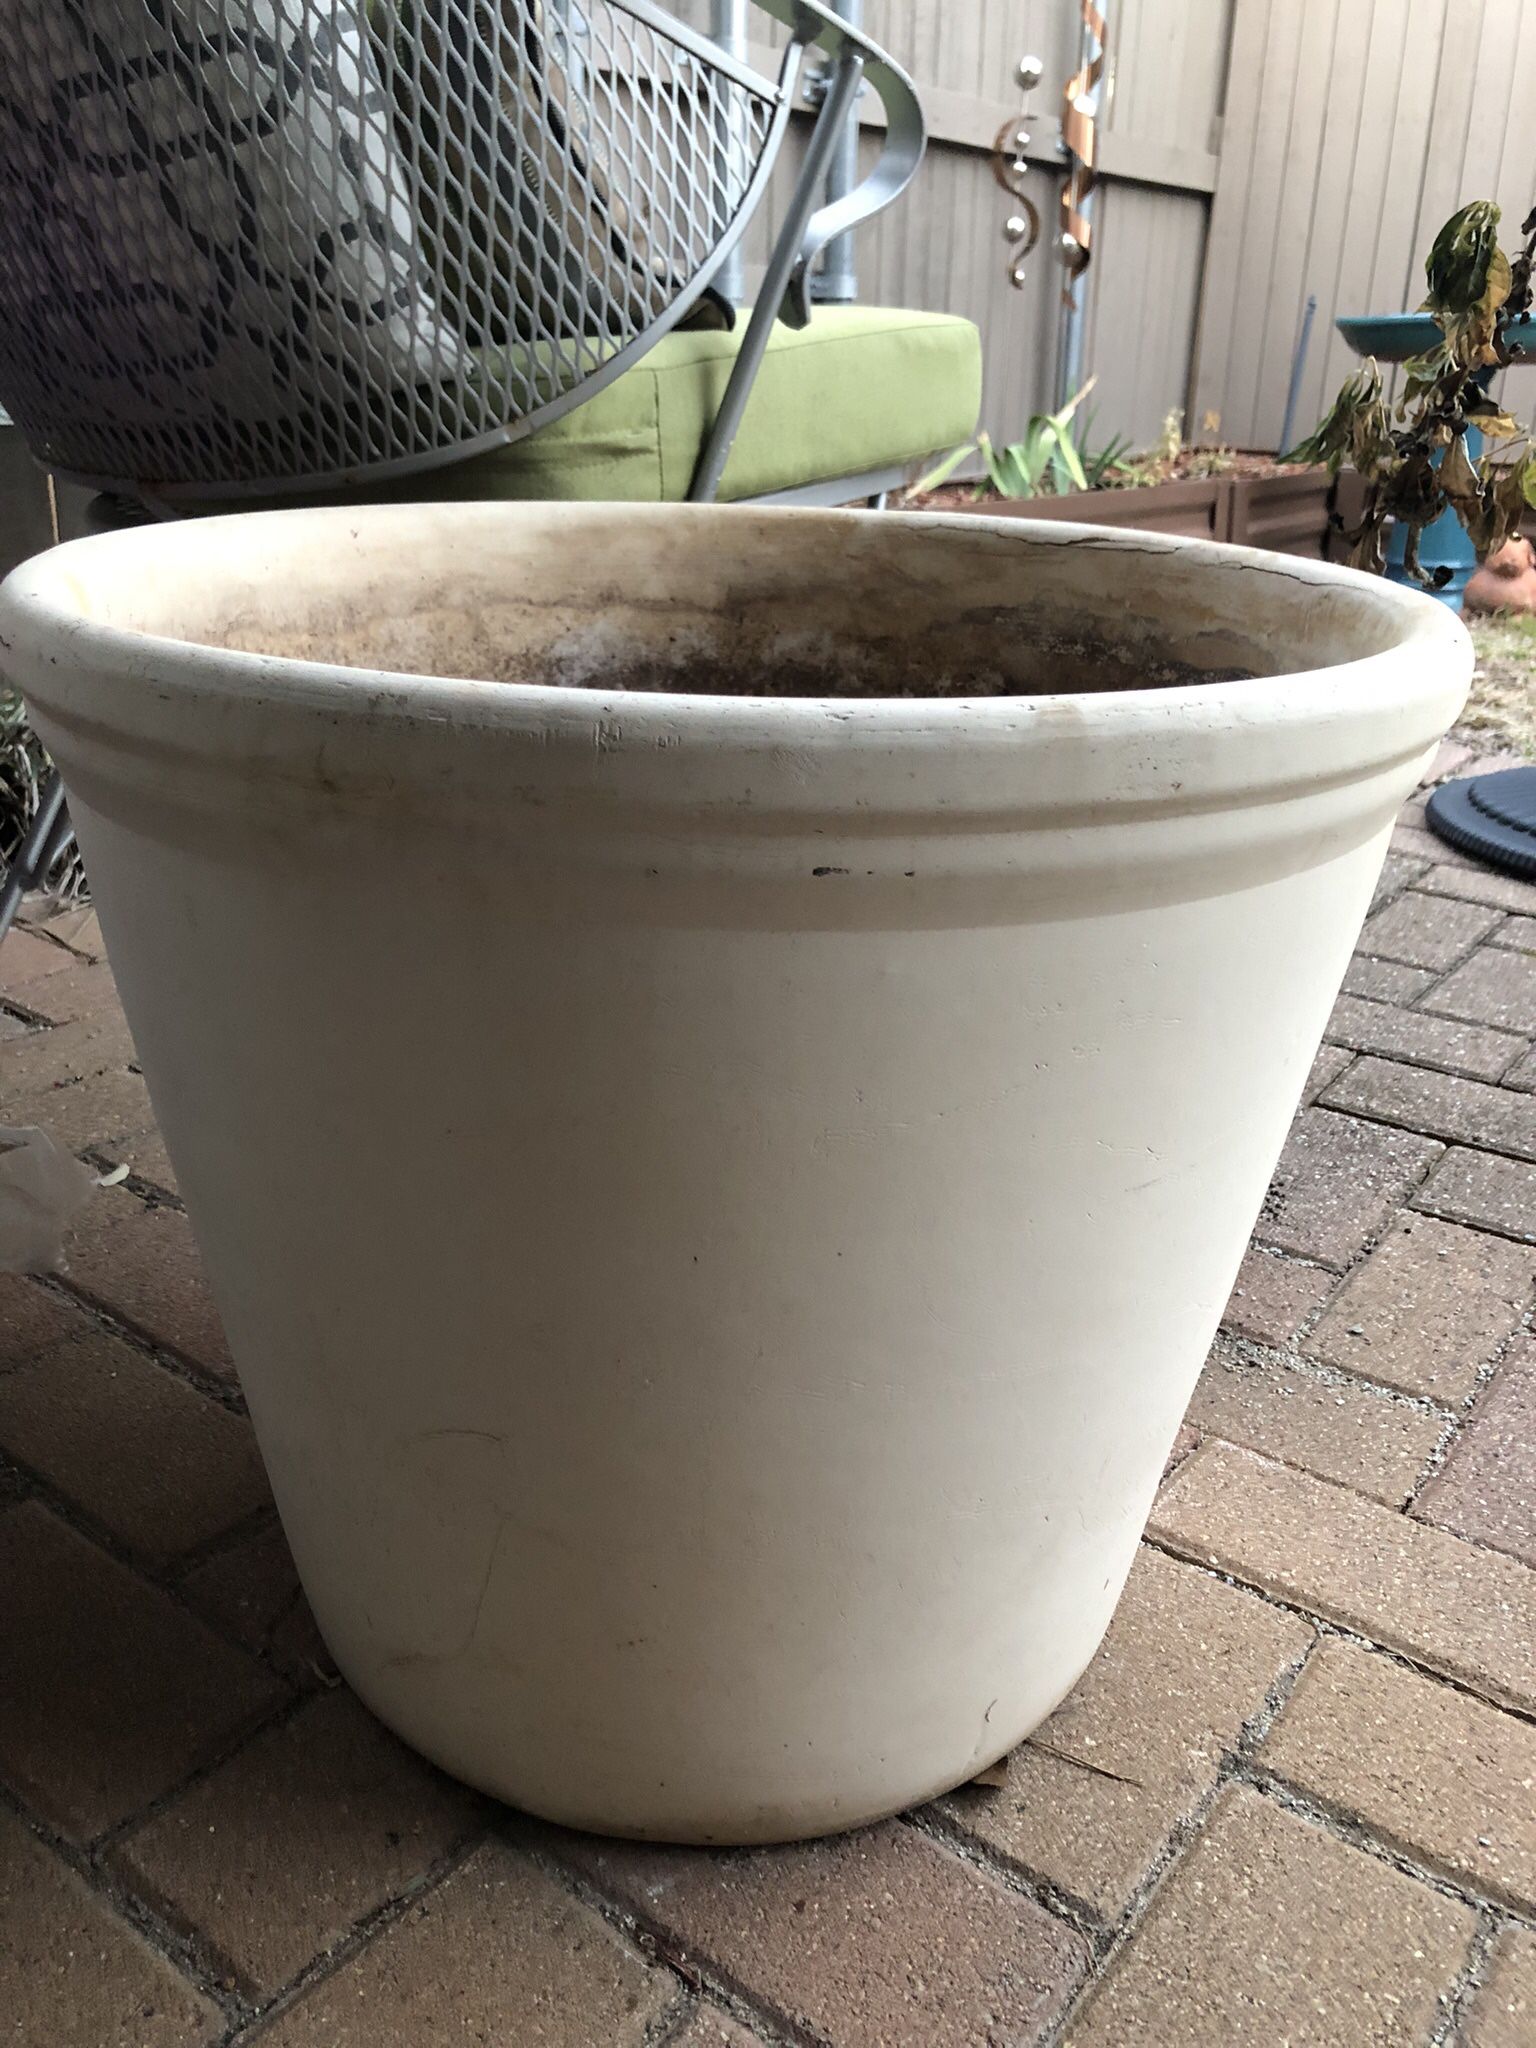 2 Planters: Perfect Spring Pots